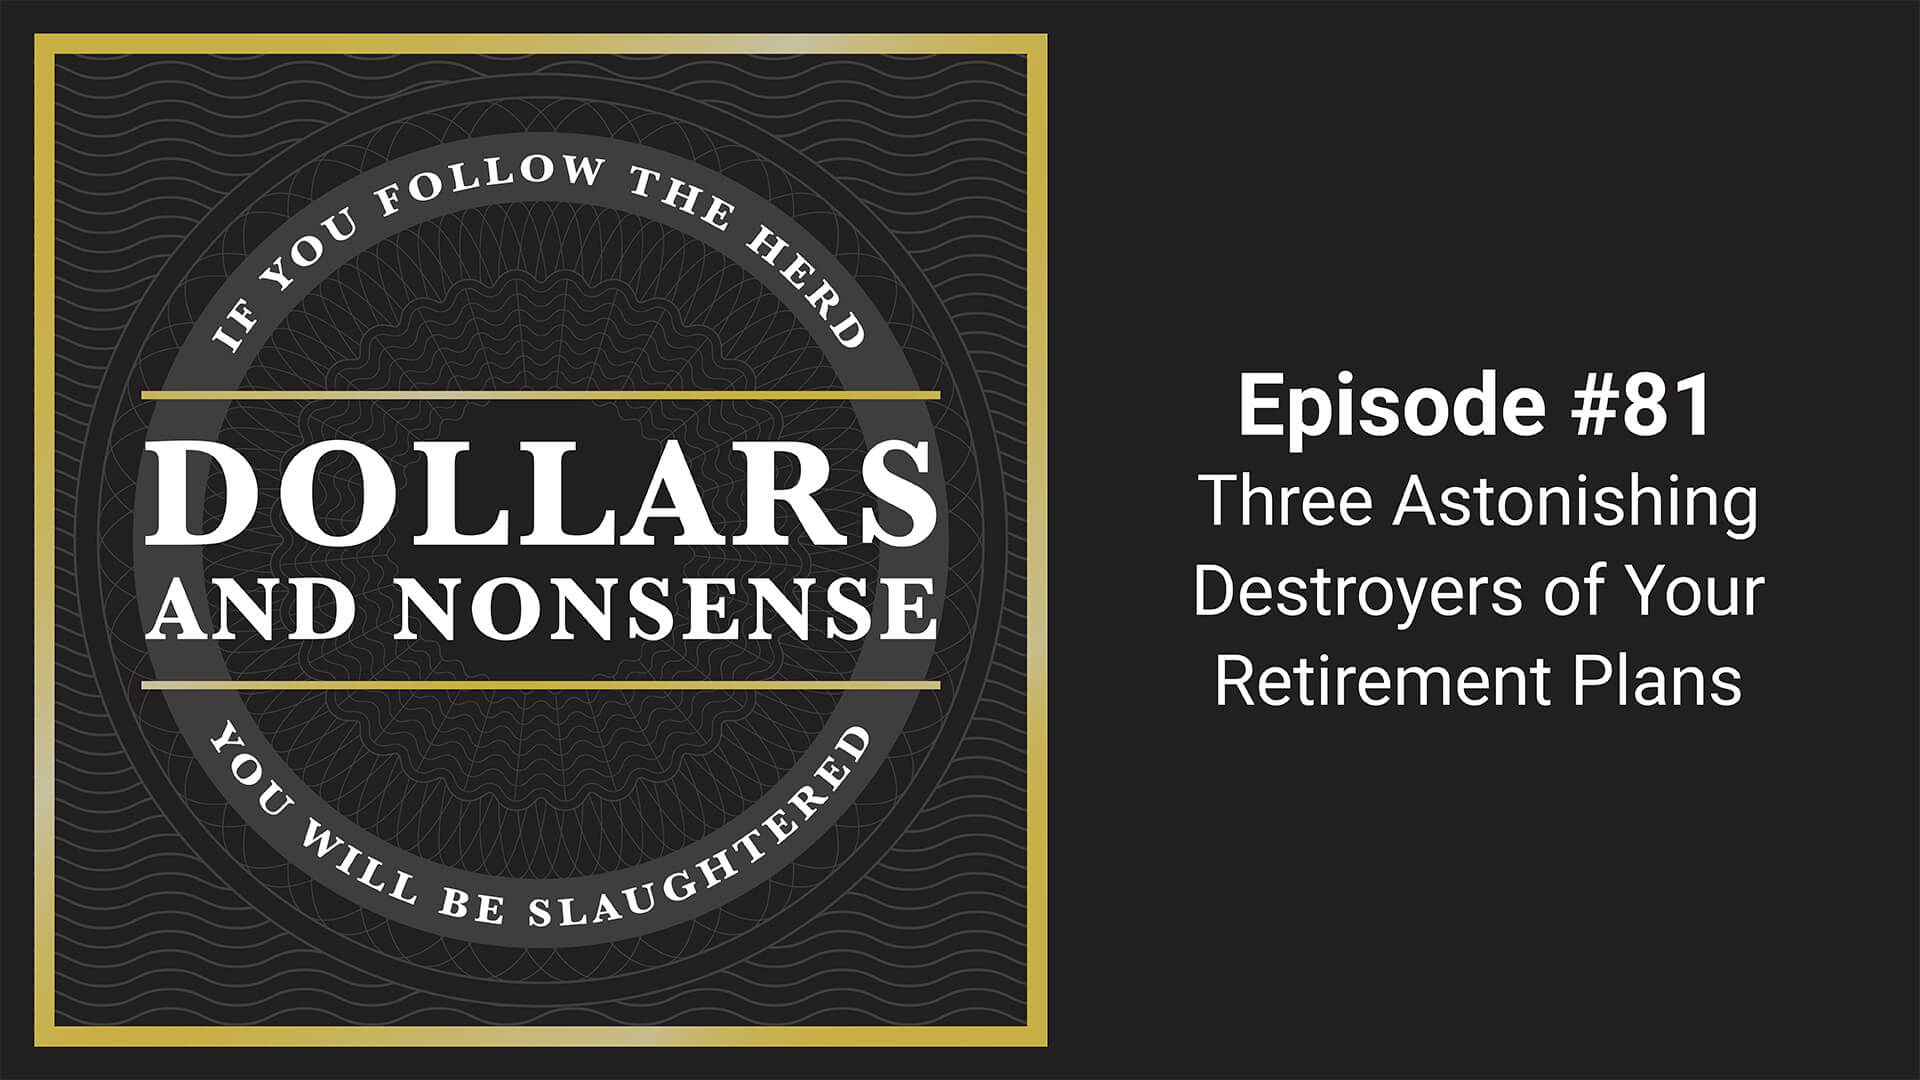 E81: Three Astonishing Destroyers of Your Retirement Plans